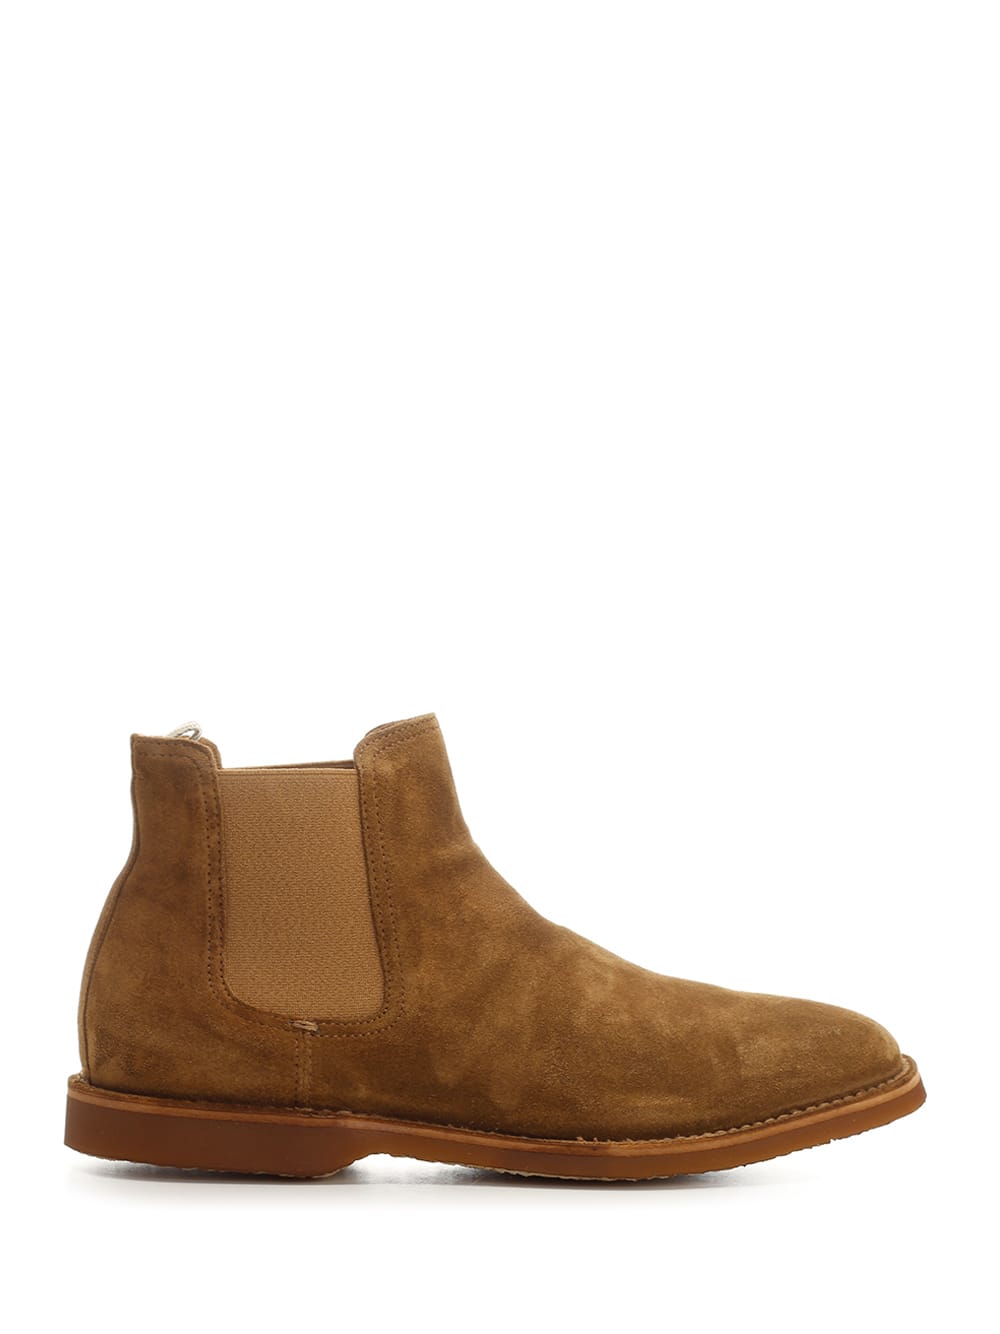 OFFICINE CREATIVE BROWN SUEDE CHEALSE BOOTS